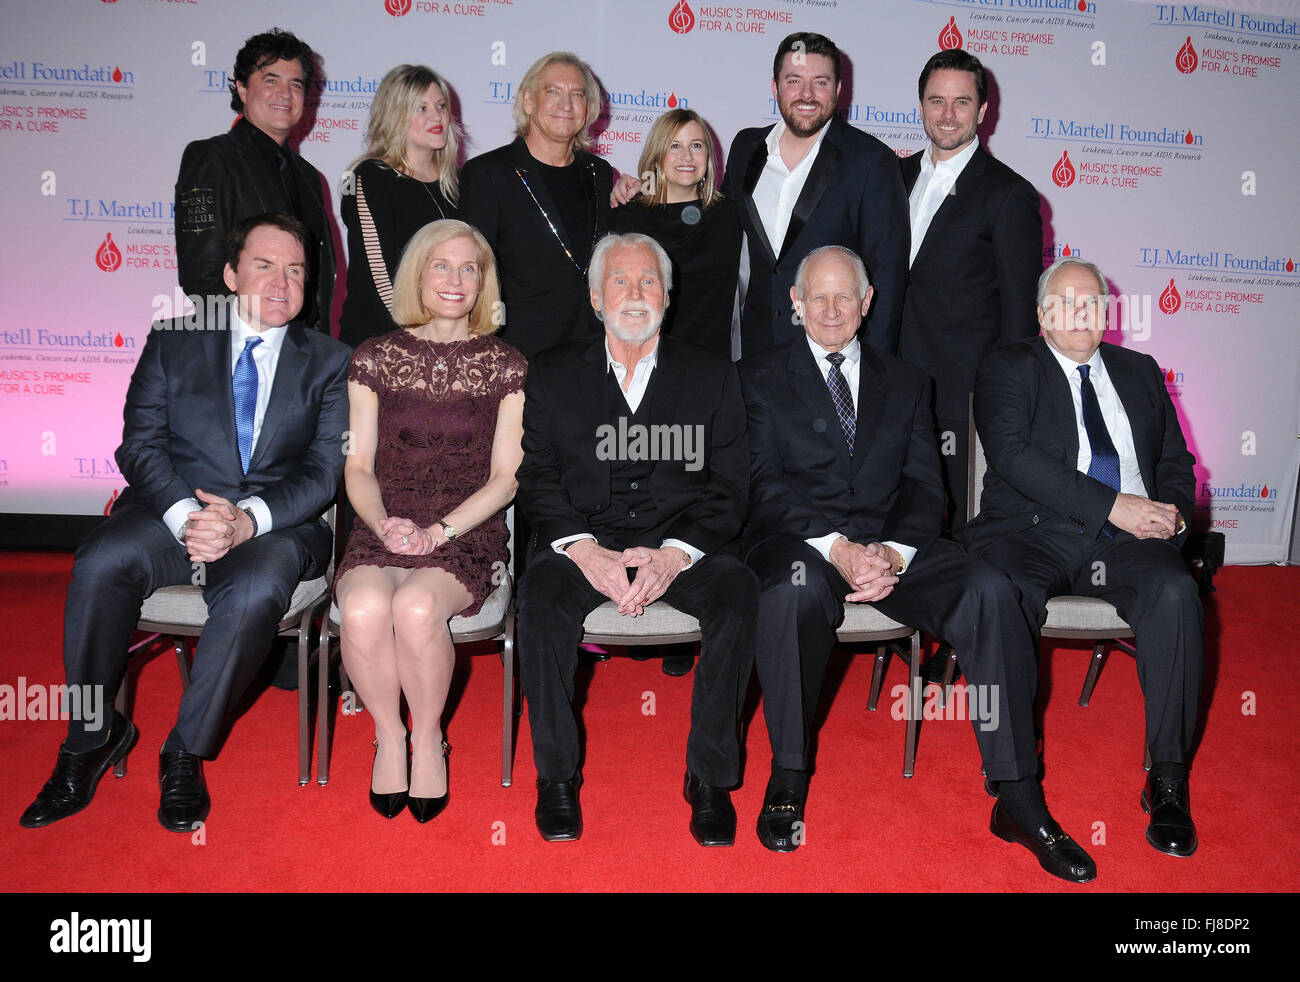 Nashville, TN, USA. 5th Oct, 2013. 29 February 2016 - Nashville, Tennessee - Jackie Wilson, T.J. Martell Foundation's Laura Heatherly, Gibson's Dave Berryman, Big Machine Label Group's Scott Borchetta, Joe Walsh of The Eagles, Nashville Mayor Megan Barry, CMT's Leslie Fram, Chris Young, and Charles Esten; (front row, l-r): honorees Brian Phillips, Dr. Jennifer Pietenpol, Kenny Rogers, Aubrey Harwell, and Frederick W. Smith. T.J. Martell Foundation 8th Annual Nashville Honors Gala held at the Omni Hotel. Photo Credit: Laura Farr/AdMedia © Laura Farr/AdMedia/ZUMA Wire/Alamy Live News Stock Photo